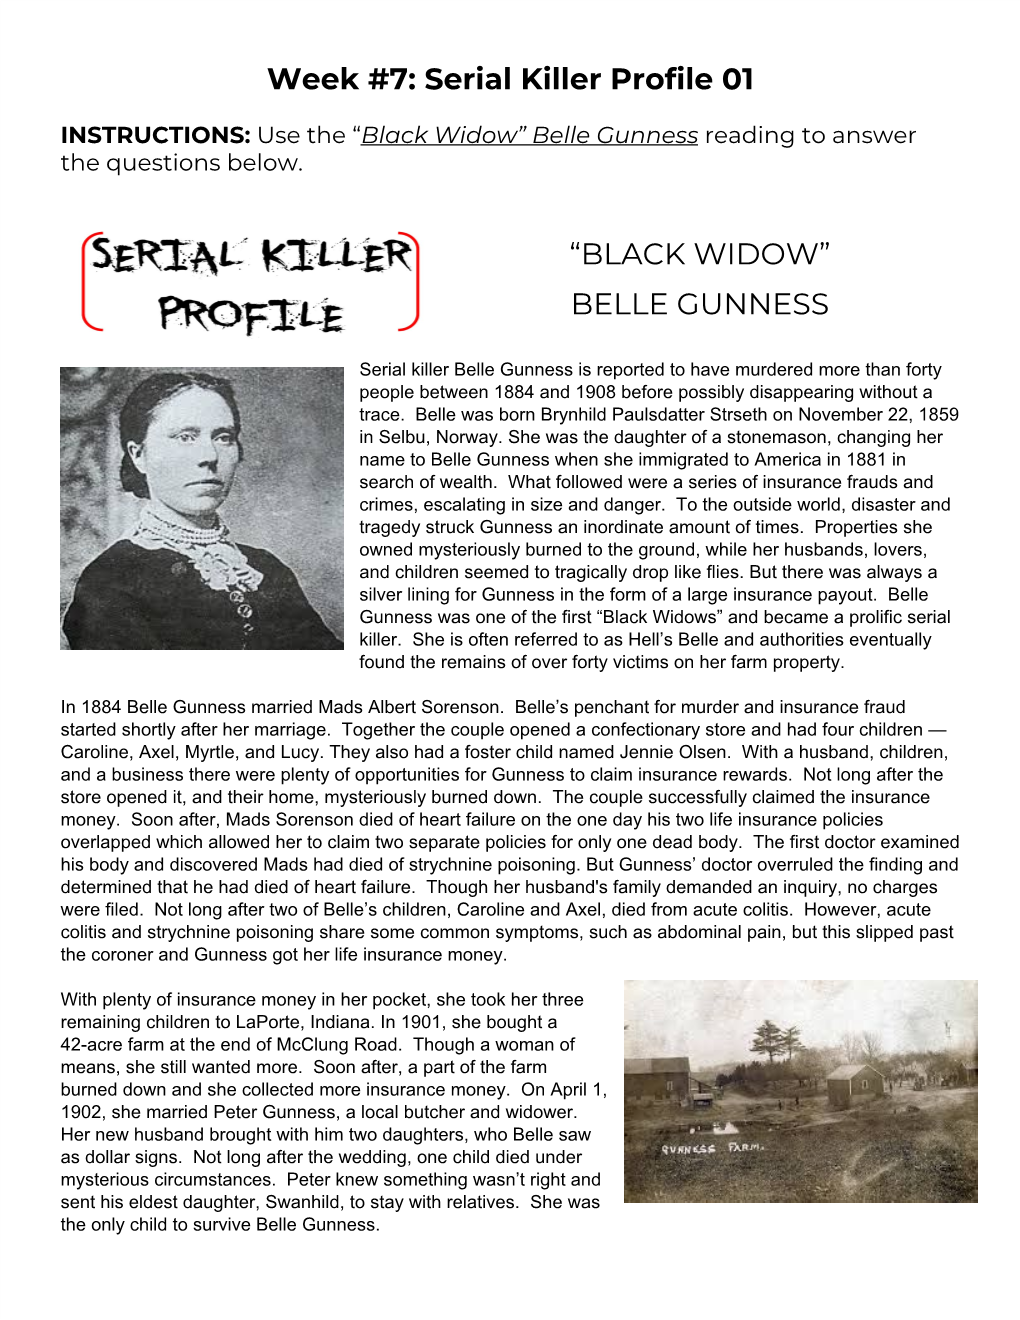 Belle Gunness ​ ​Reading to Answer the Questions Below